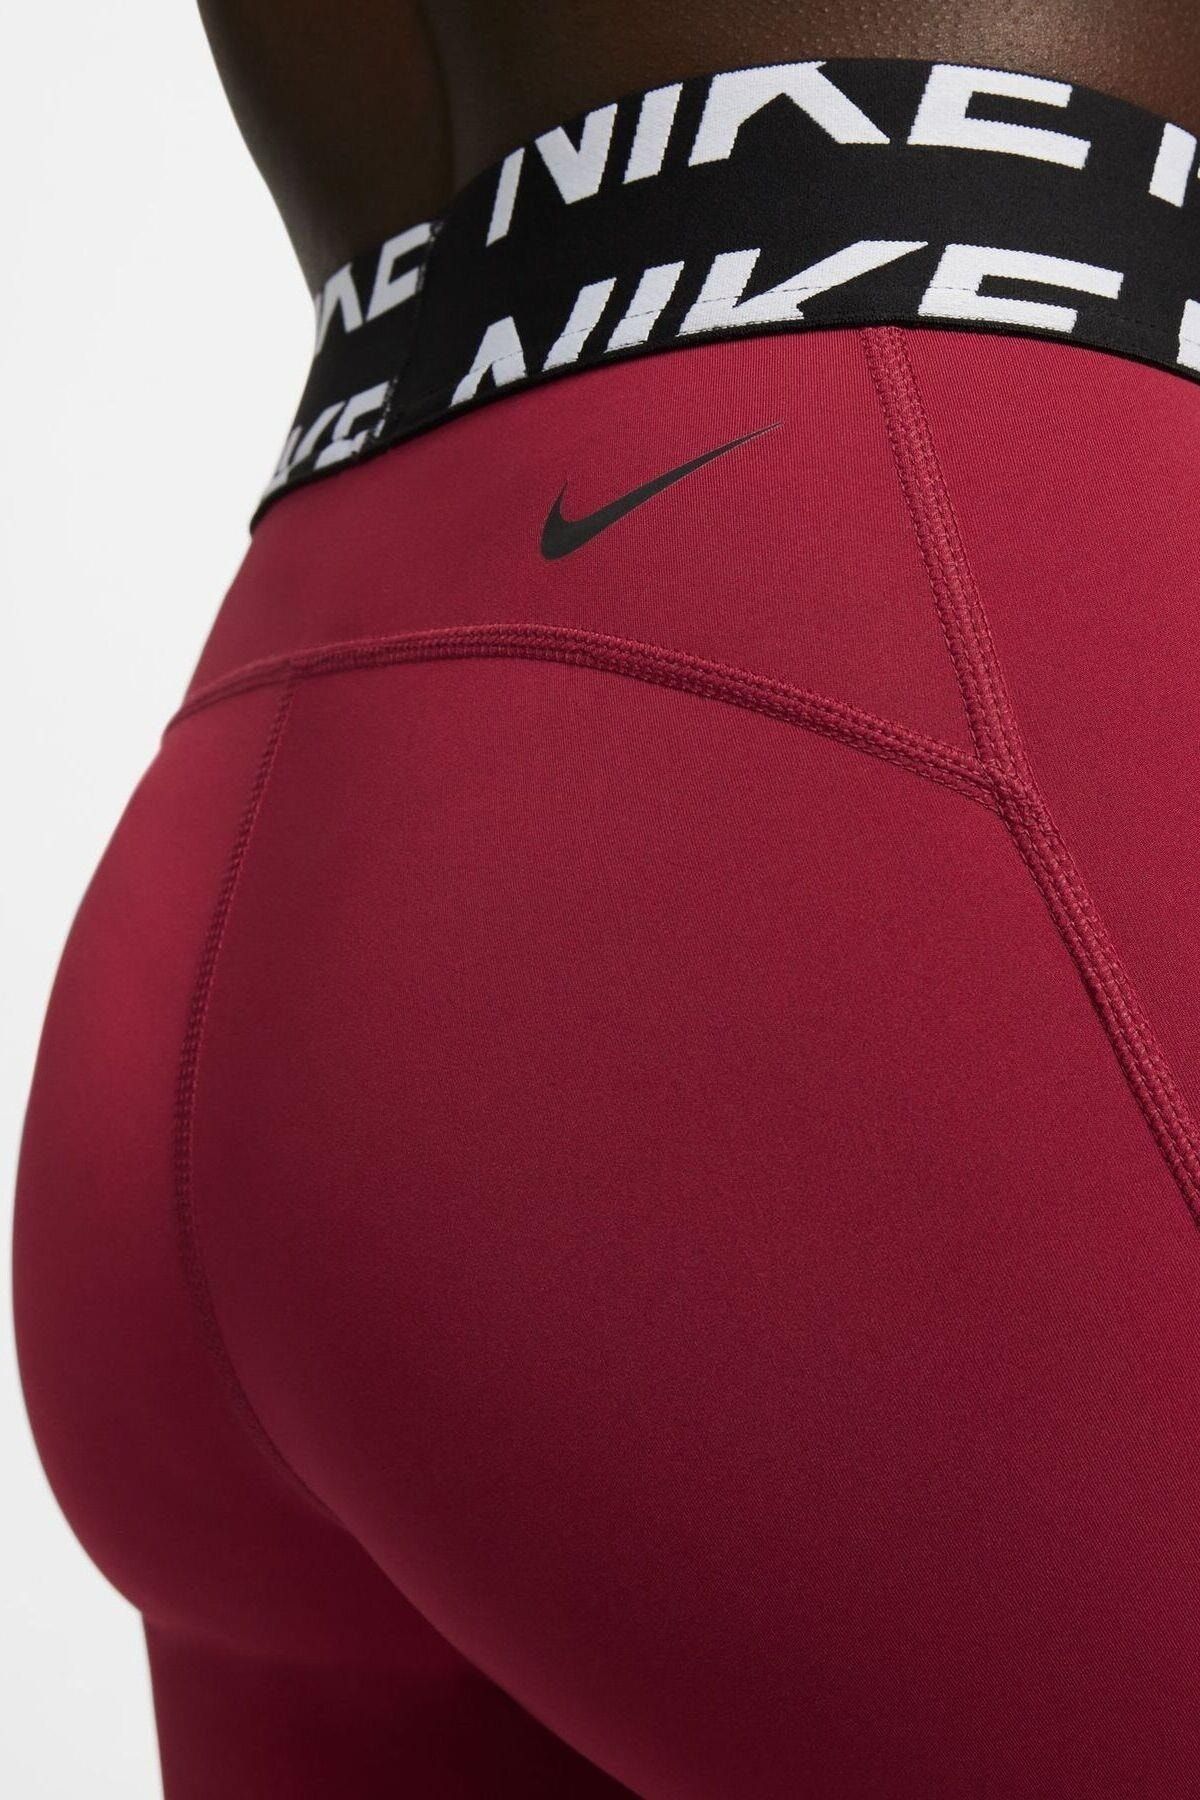 Nike Pro Training Crossover Leggings In Black And Pink